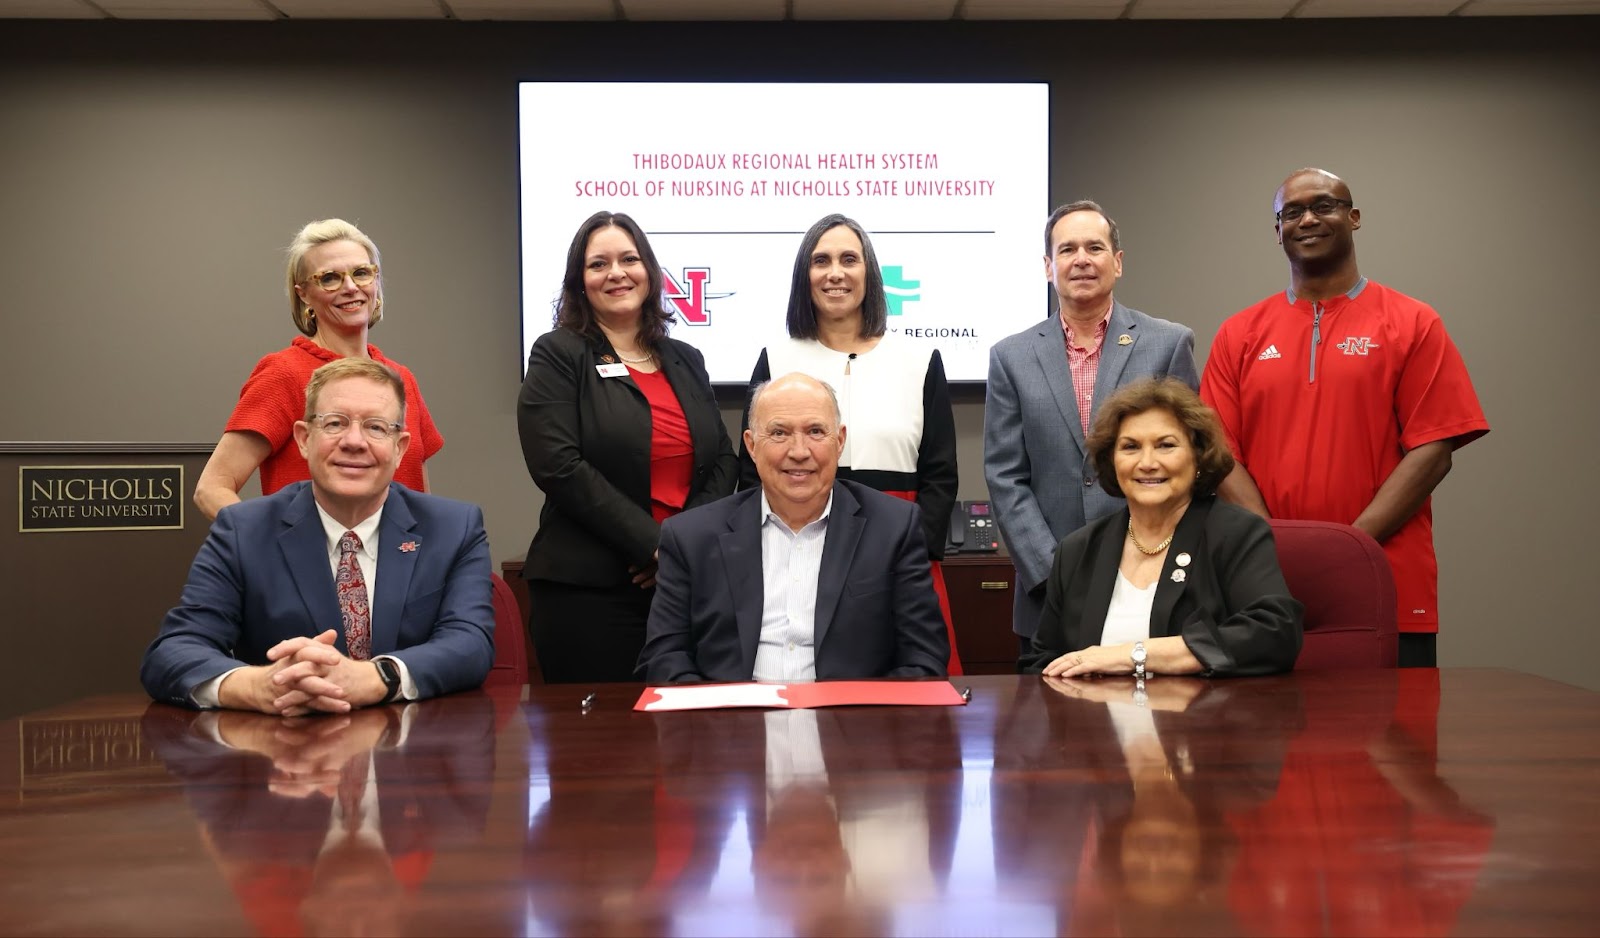 University Receives Largest-Ever Investment to Expand Nursing Program and Naming Rights to Thibodaux Regional Health System School of Nursing at Nicholls State University [Video]